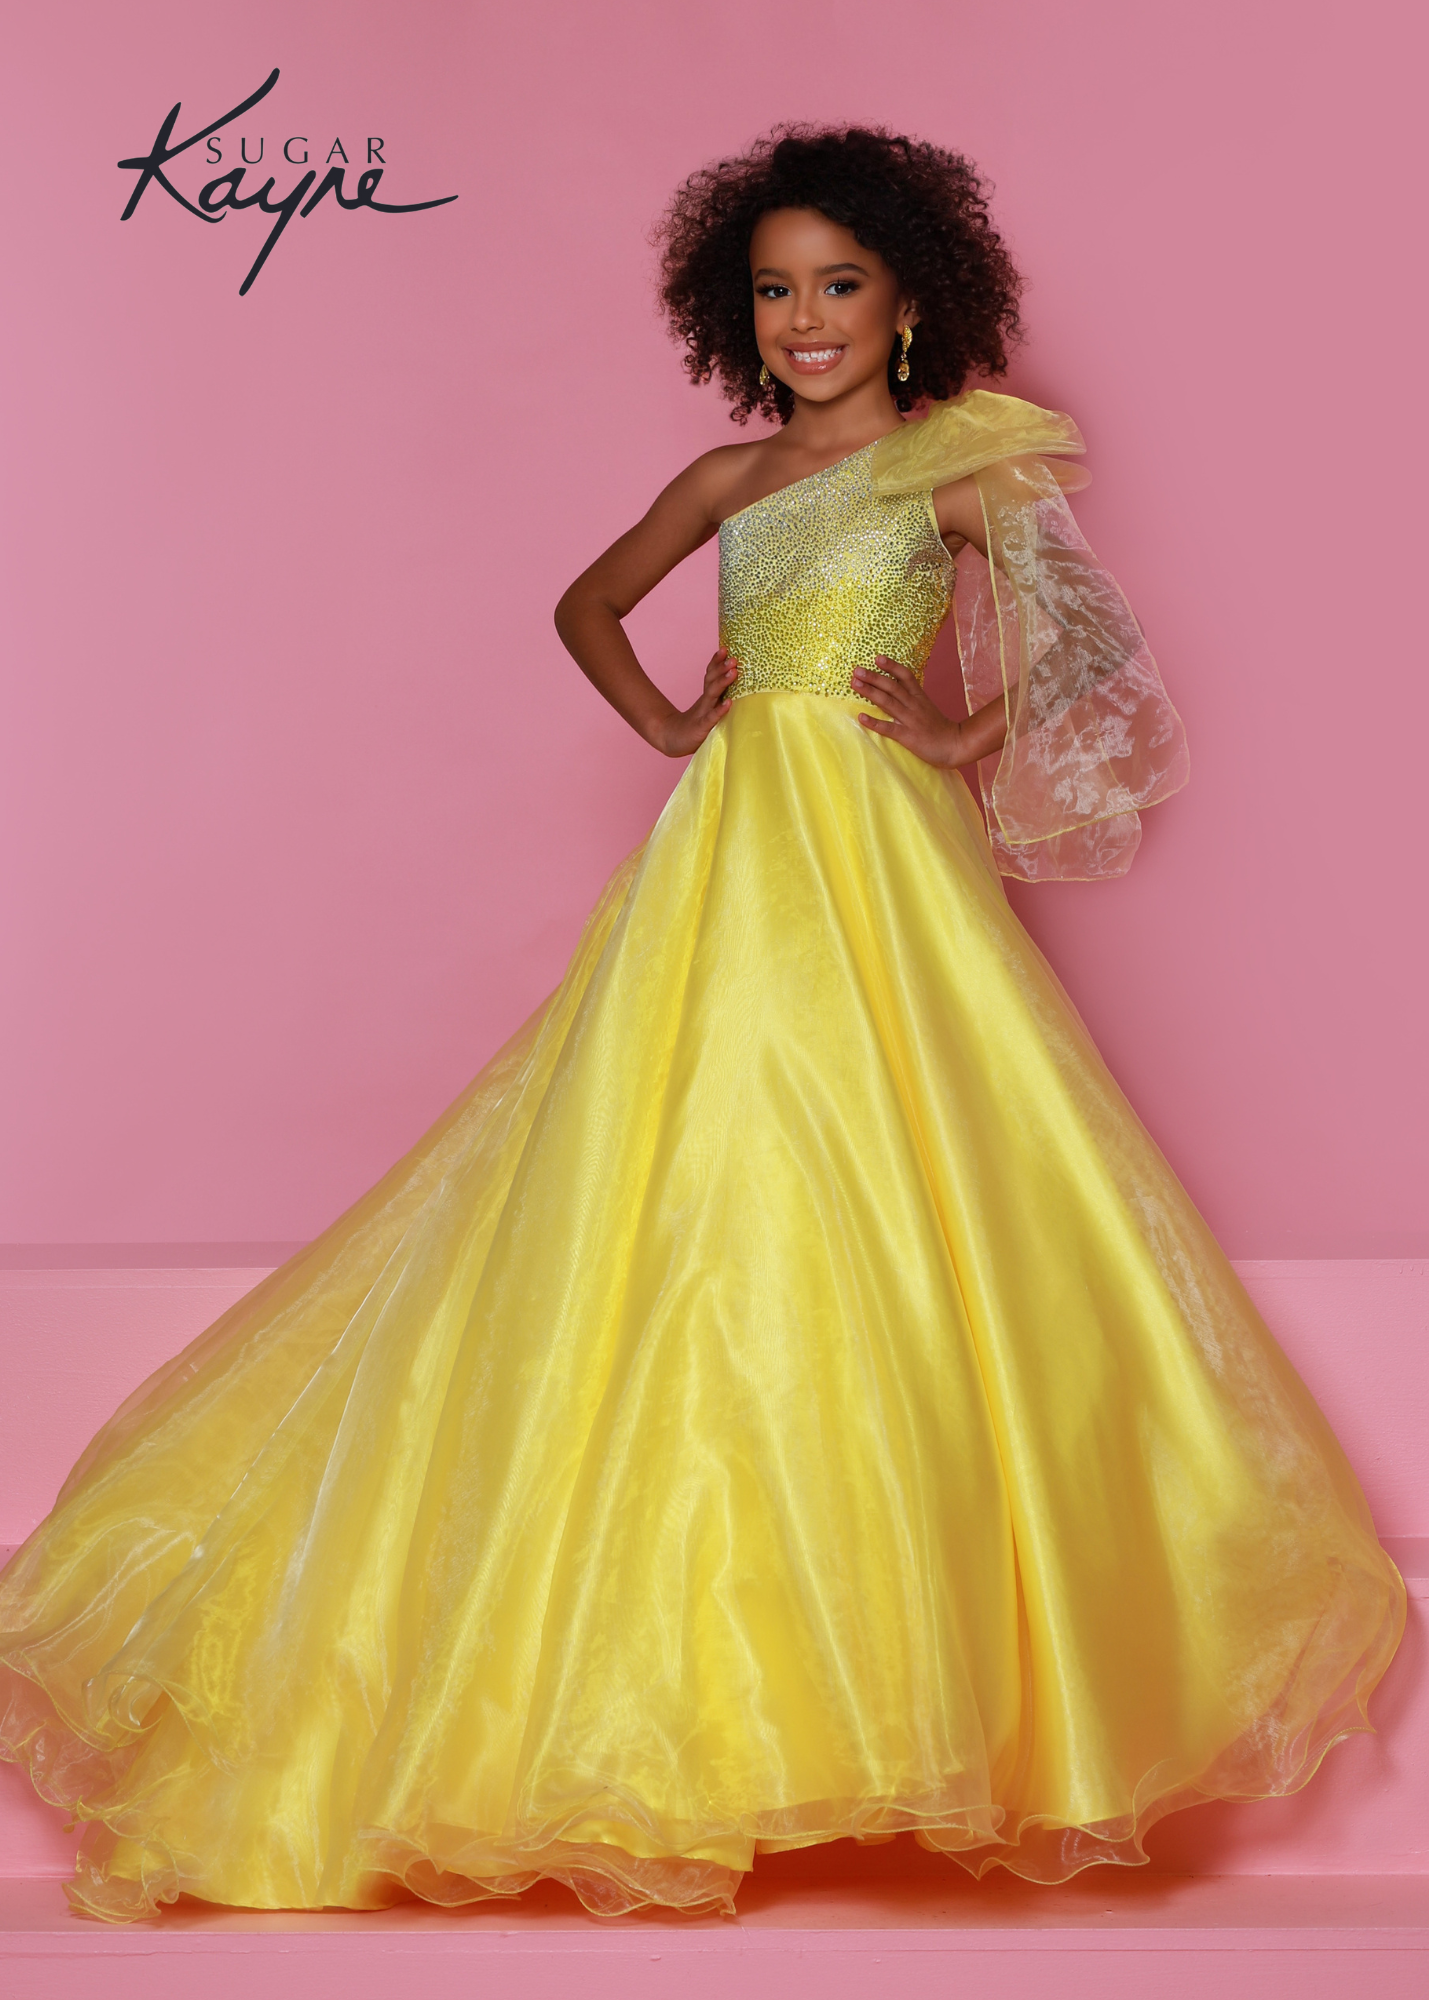 Sugar Kayne C310 Girls One Shoulder Bow A Line Shimmer Pageant Dress Crystal Gown  Go ahead and take a BOW in this lovely one-shoulder organza ballgown. The ombre beaded bodice brings all the dazzle!  Colors: Orange, Yellow, Blue  Sizes: 2, 4, 6, 8, 10, 12, 14, 16  Fabric Organza, Mesh, Satin Lining